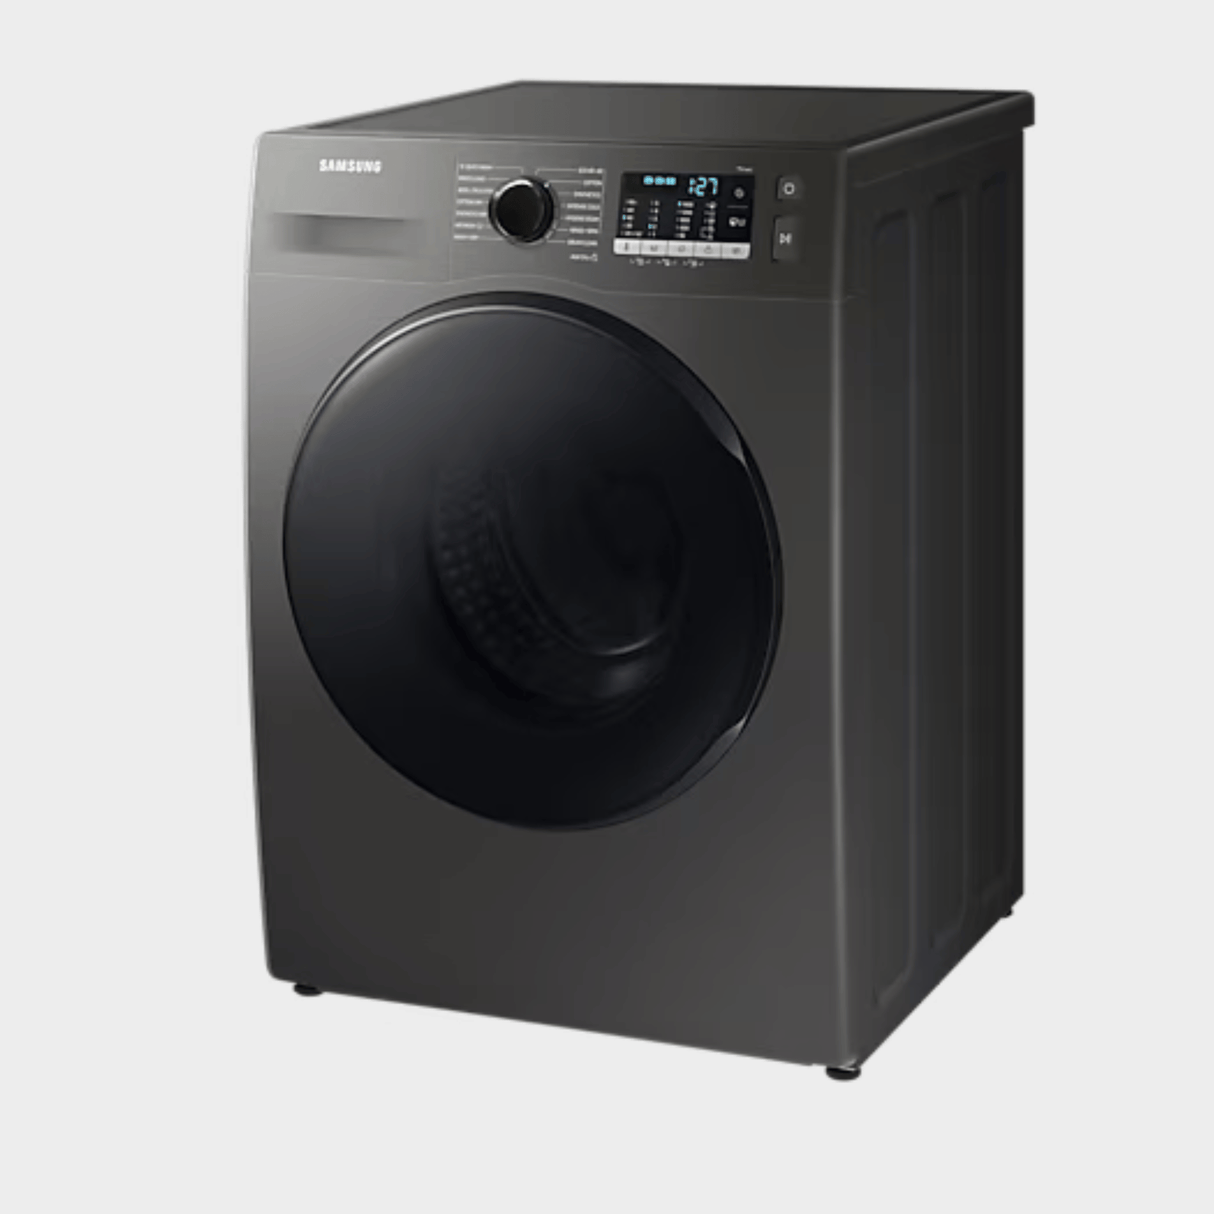 Samsung 8kg Freestanding Washer Dryer, Series 5 WD80TA046BX/EU with ecobubble™ , 1400 rpm, Graphite, E Rated, Decibel rating: 54, EU Acoustic Class: A [Energy Class E]